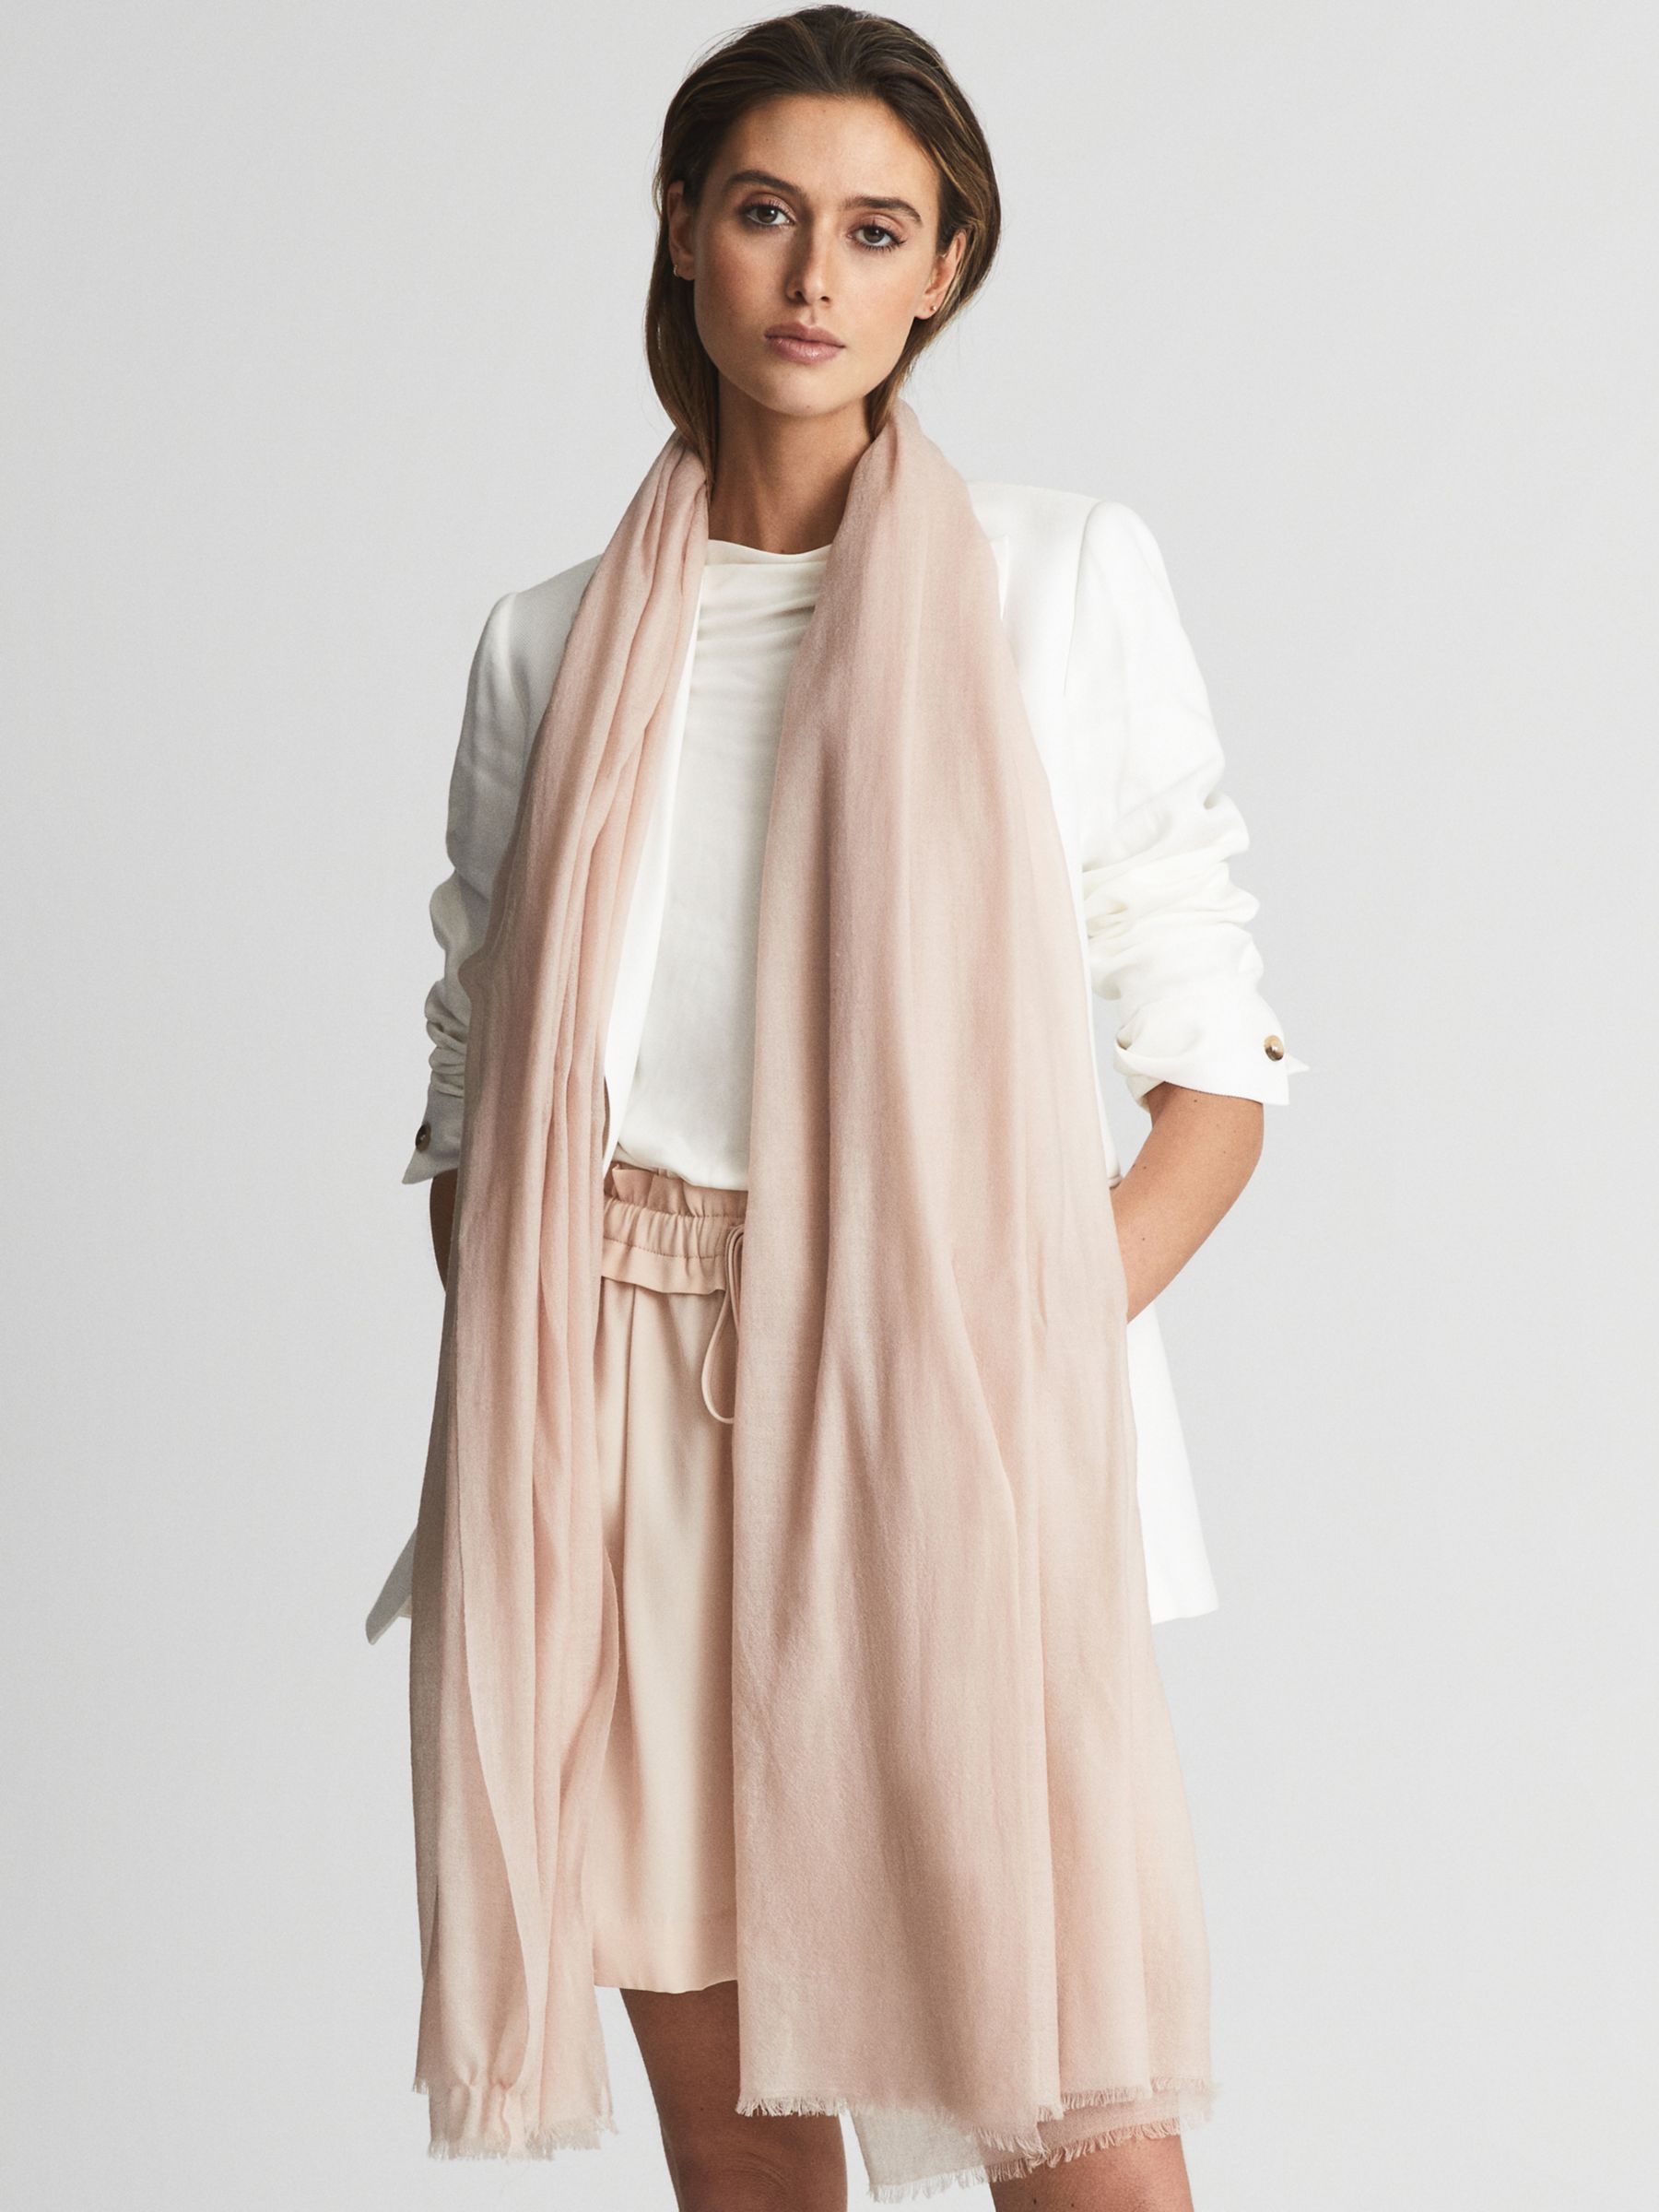 Buy Reiss Heidi Wool and Cashmere Scarf Online at johnlewis.com